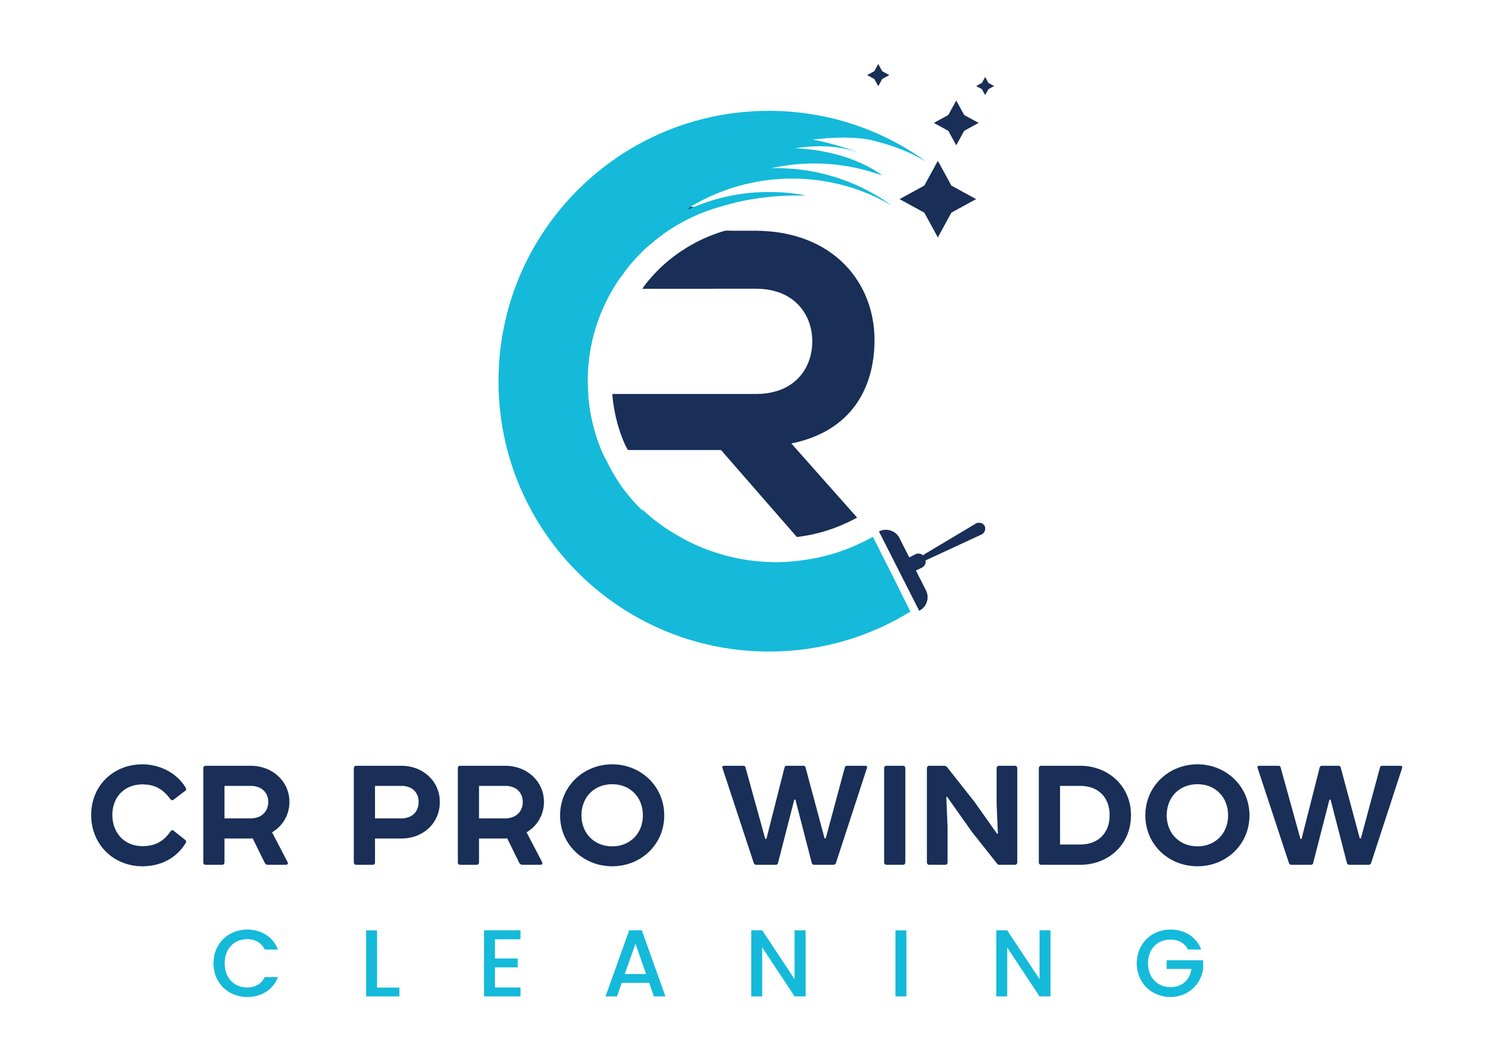 CR PRO WINDOW CLEANING